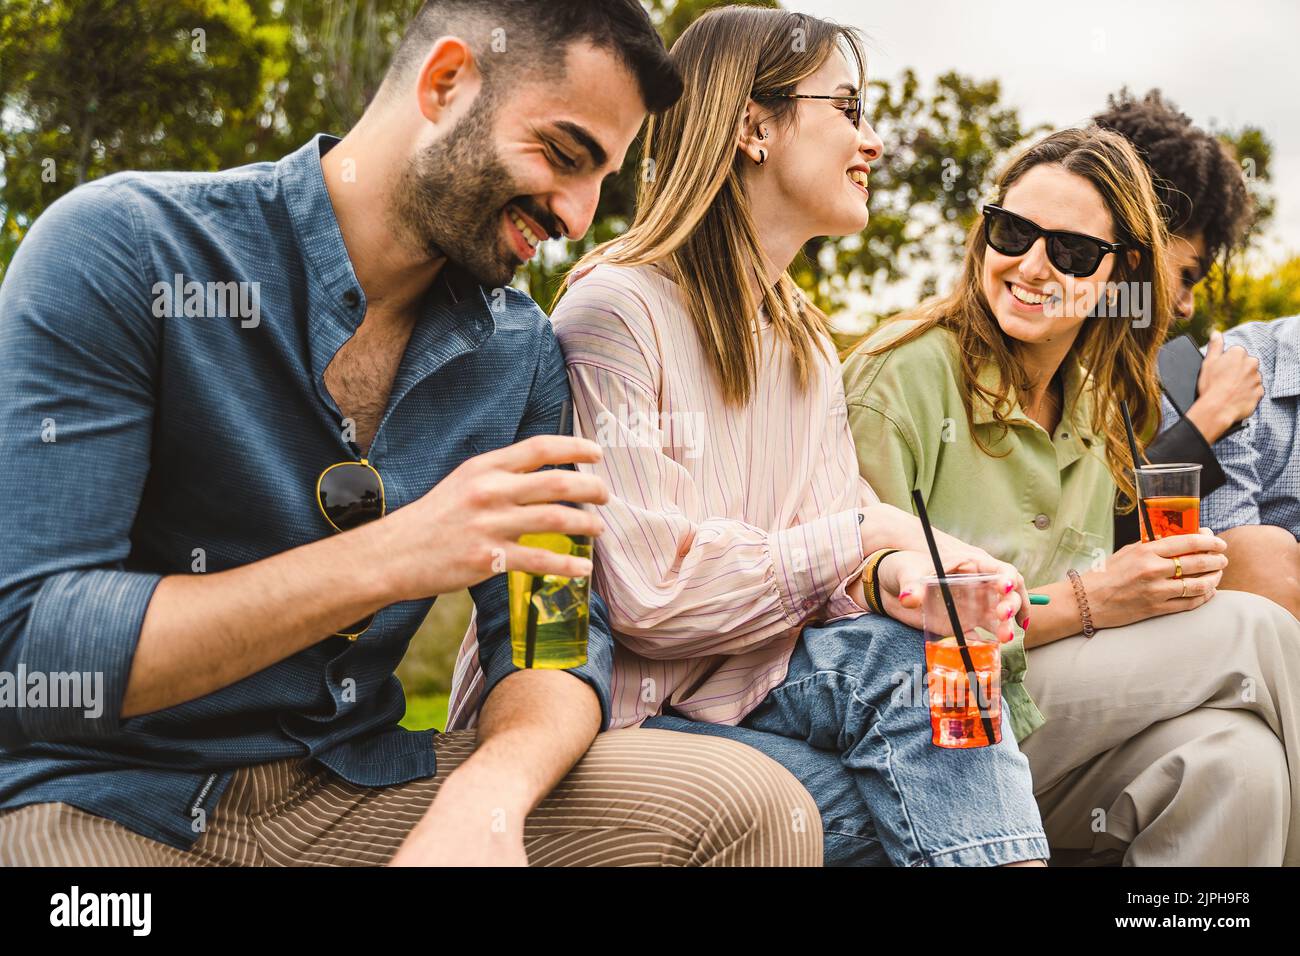 Group of happy friends sitting outdoors and having fun drinking cocktails on plastic glasses - alcohol and people lifestyle concept Stock Photo